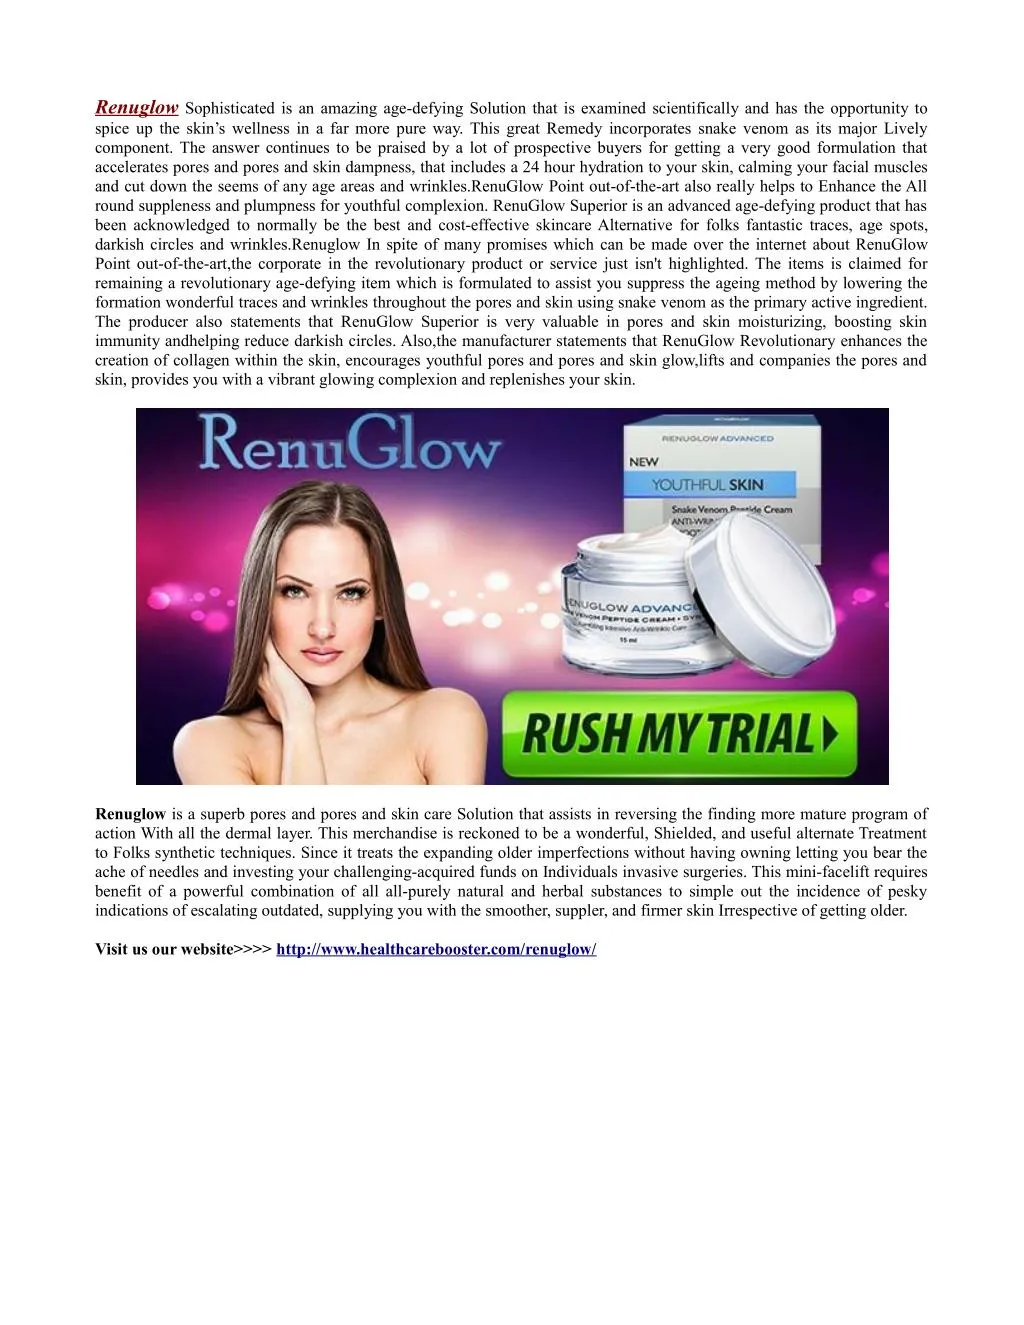 renuglow sophisticated is an amazing age defying